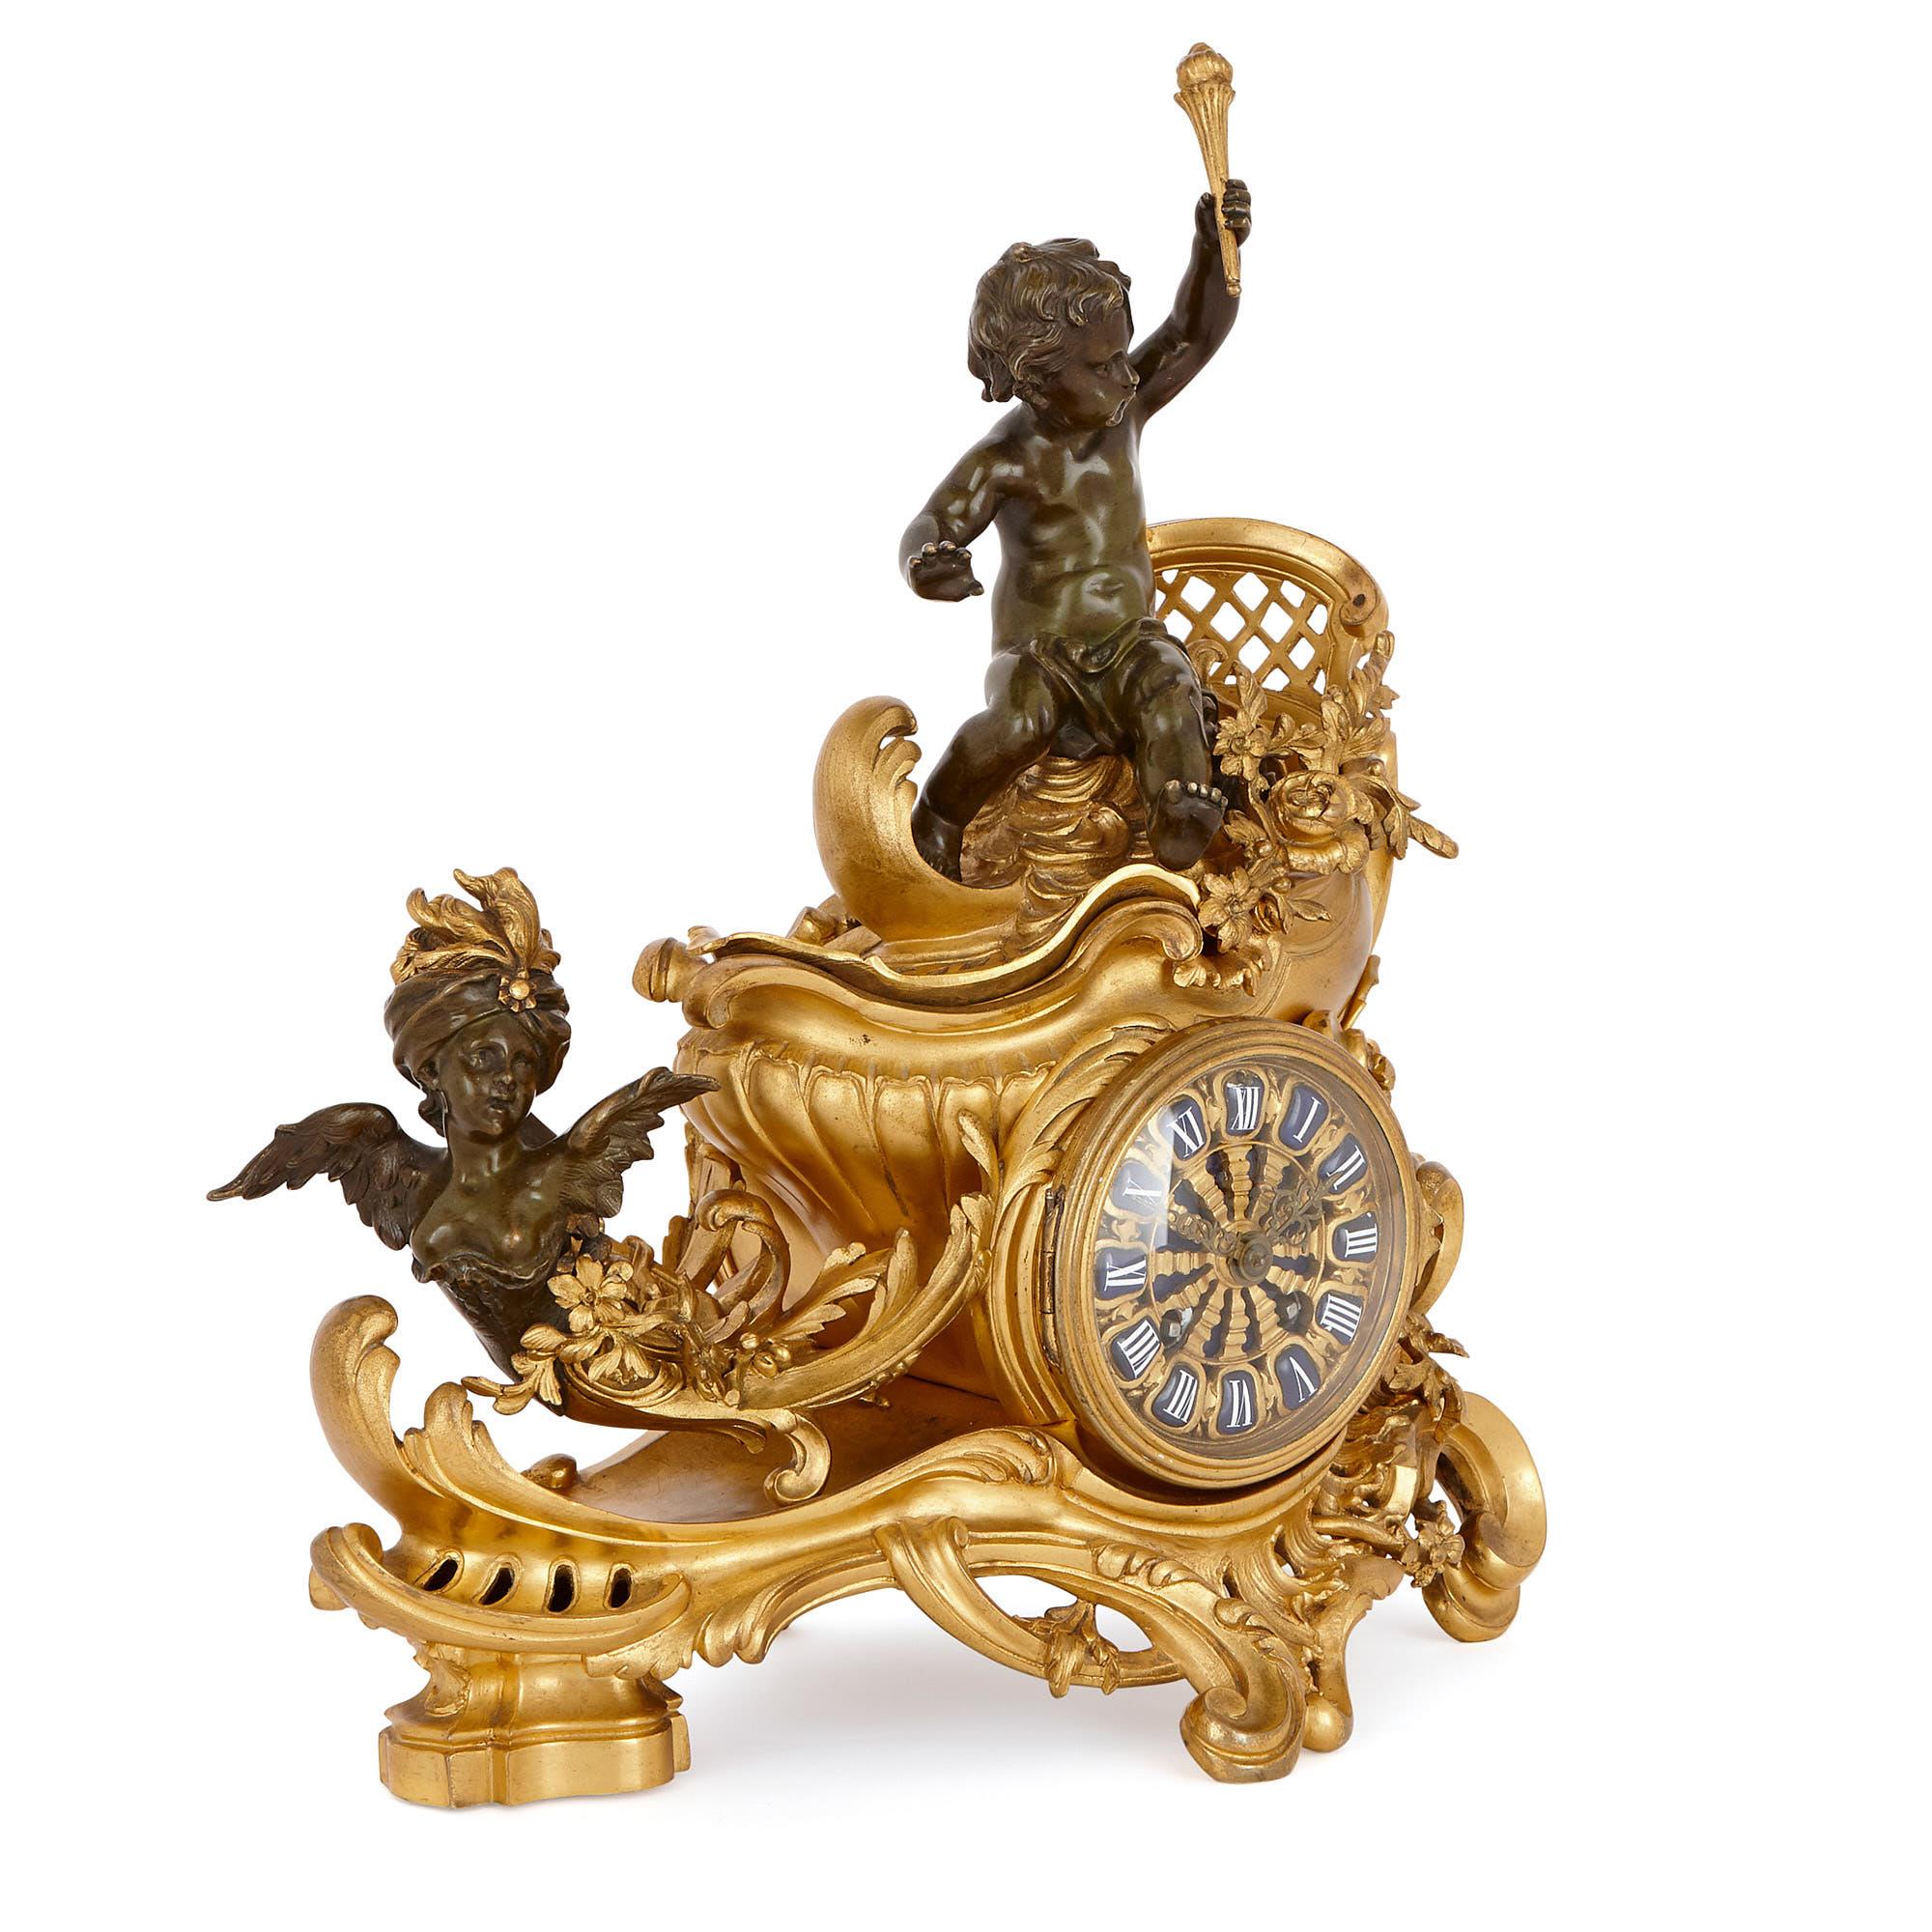 With its abundance of curves, scrolling foliage, its charming putti figures, and general theatricality and opulence, this clock set is clearly inspired by French decorative arts of the Louis XV period (1710-1774). These made use of Rocaille style